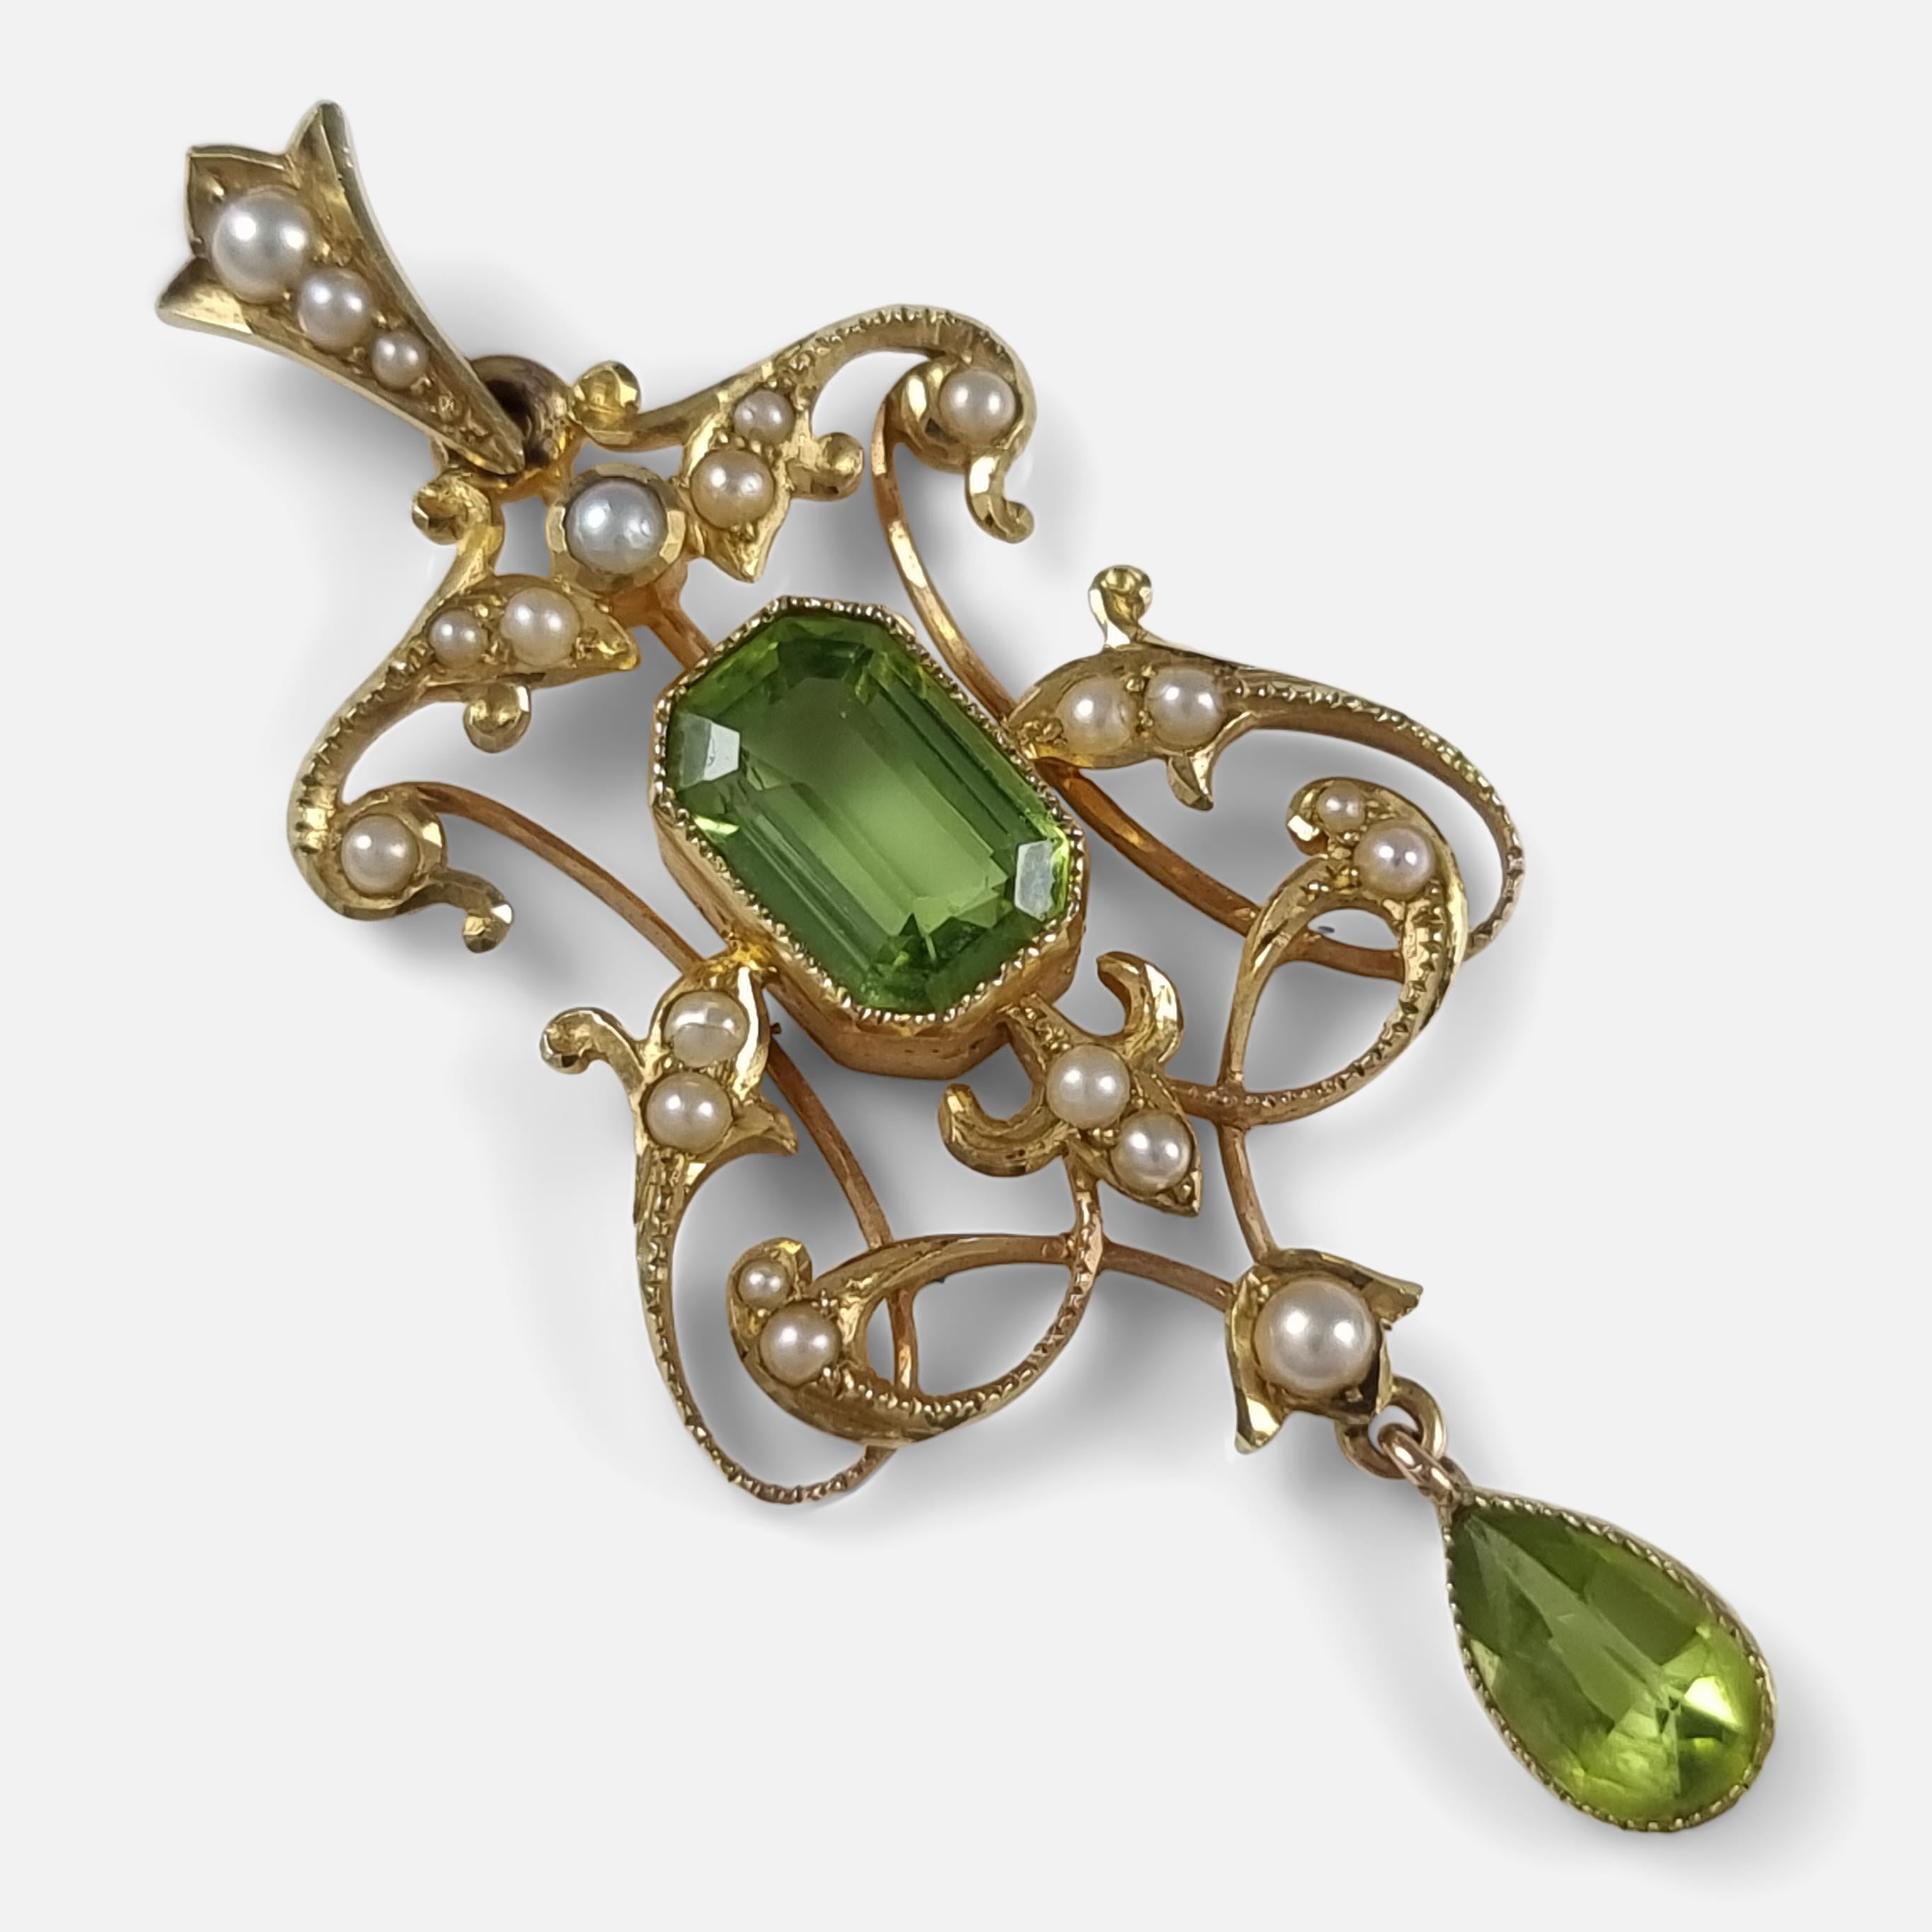 An antique Edwardian period 15ct yellow gold peridot and seed pearl pendant.

As was common for the period, the pendant is stamped '15ct' to denote 15 carat gold fineness.

Date: - Circa 1905.

Measurement: - 4.7cm (height including bale) x 2.2cm